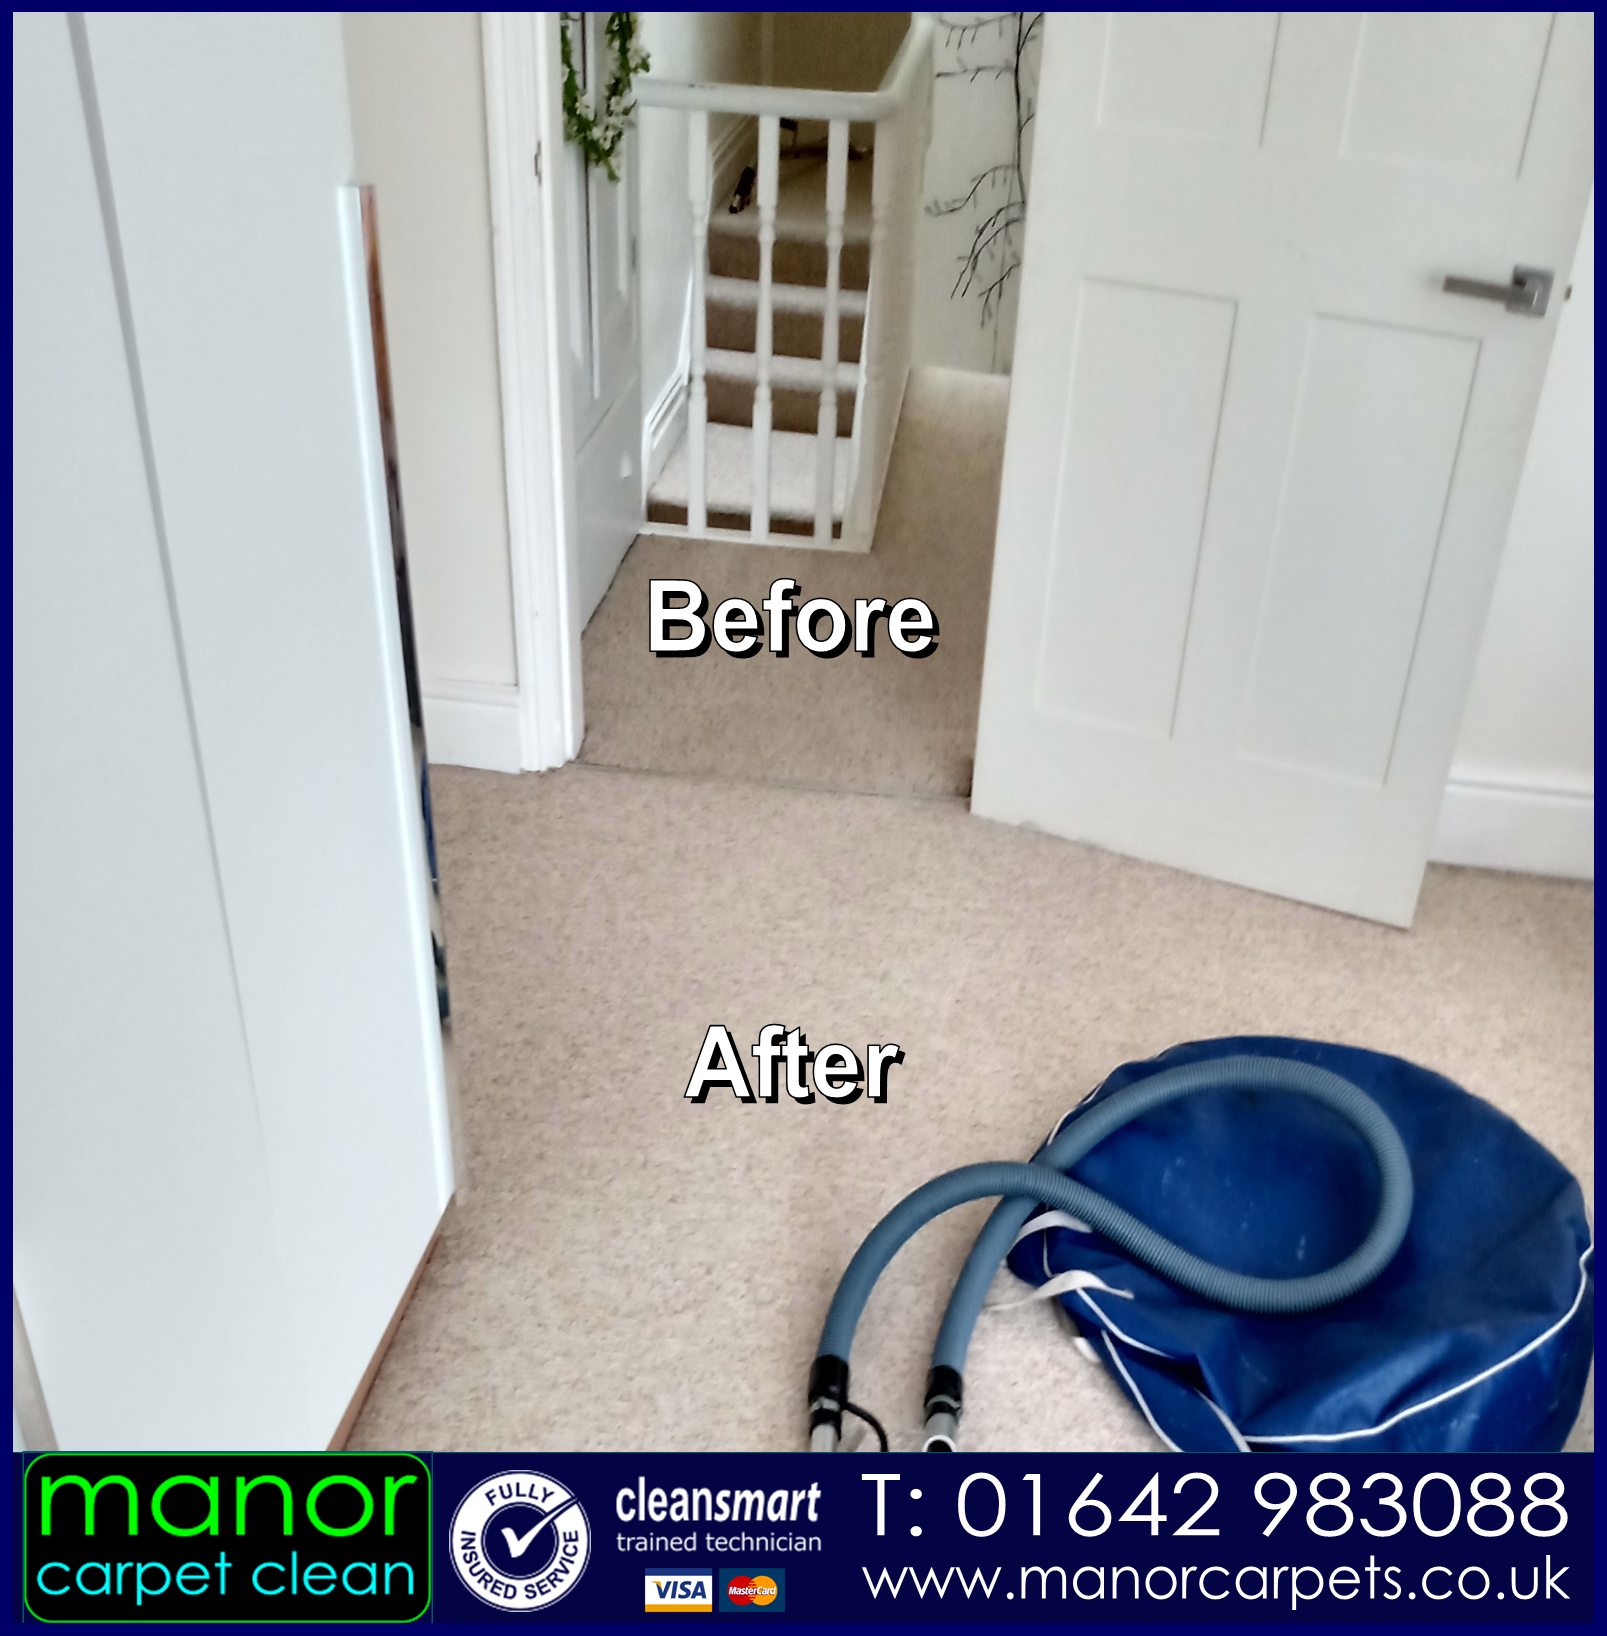 Carpet cleaning with Manor Carpet Cleaning, Middlesbrough